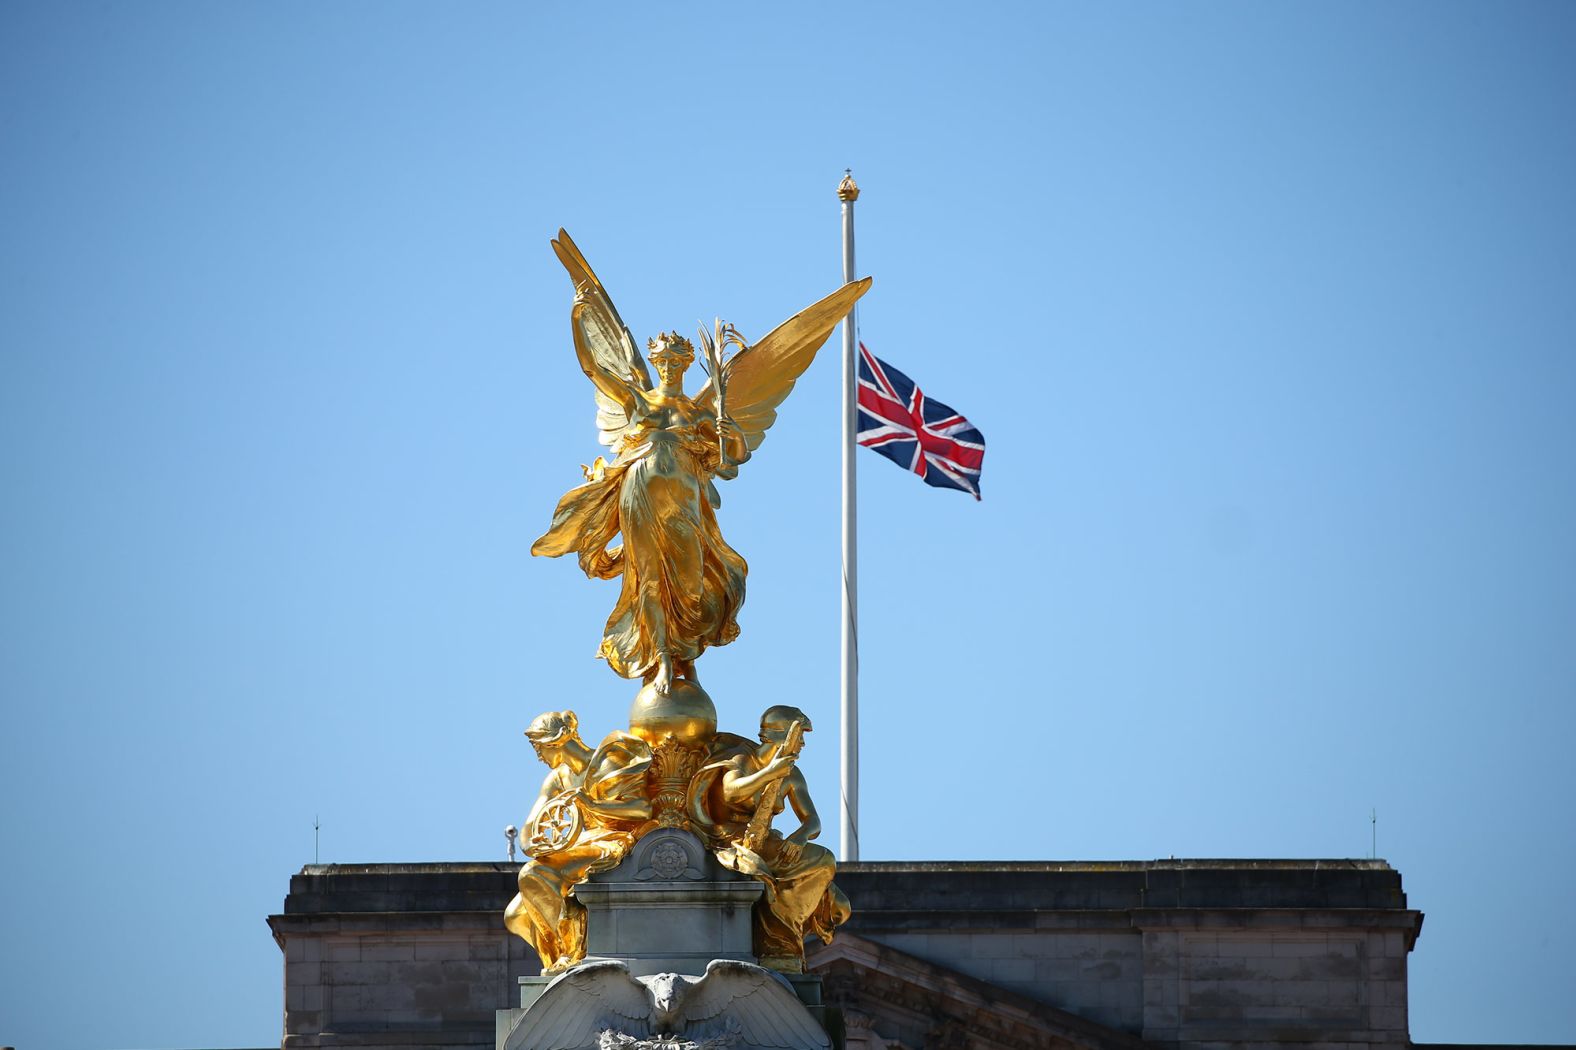 A flag flies at half-staff over Buckingham Palace on Saturday.